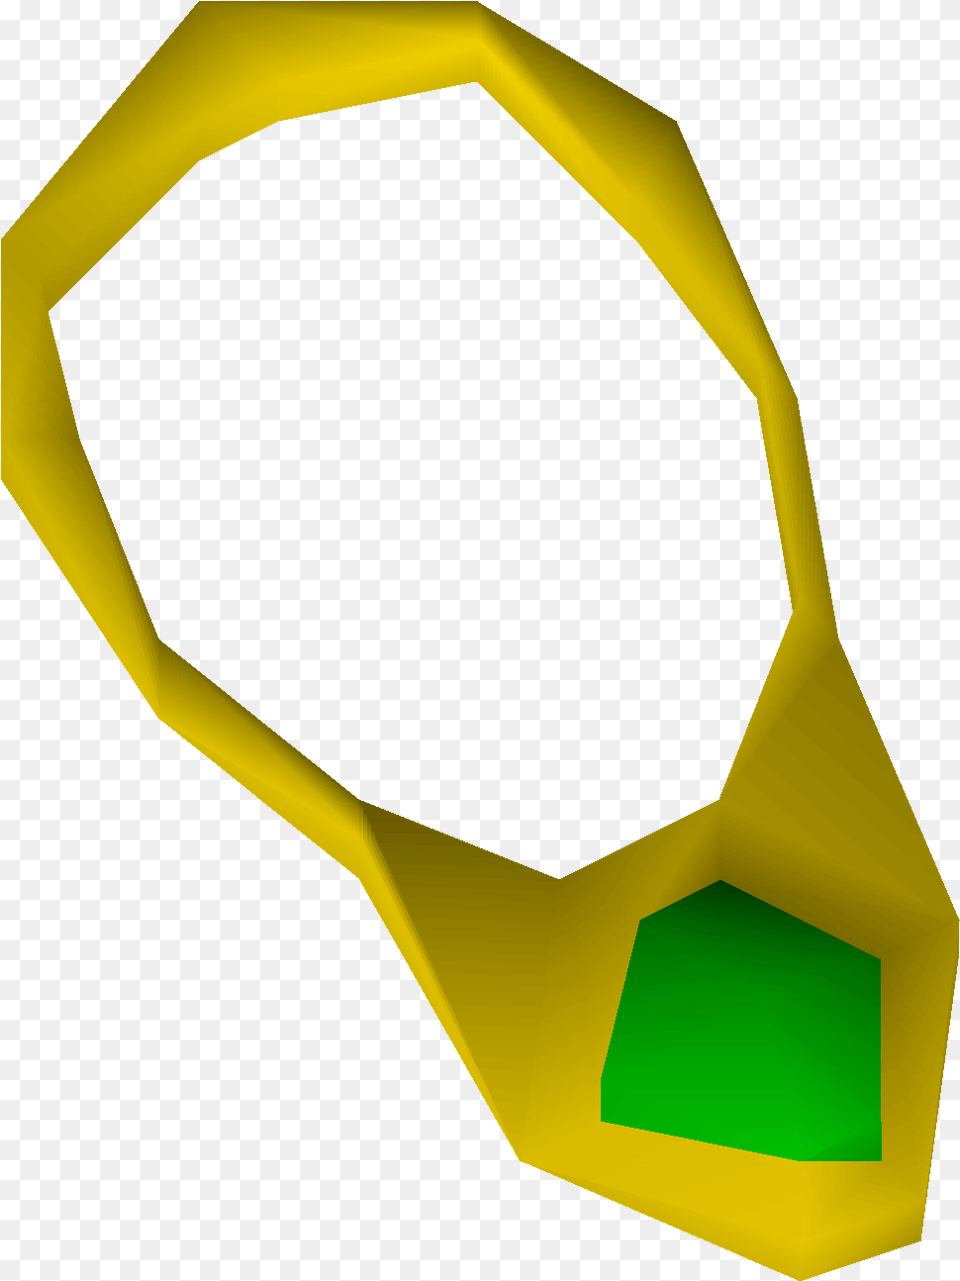 Emerald Necklace Osrs Wiki Emerald Necklace Runescape, Accessories, Formal Wear, Tie, Gemstone Free Transparent Png